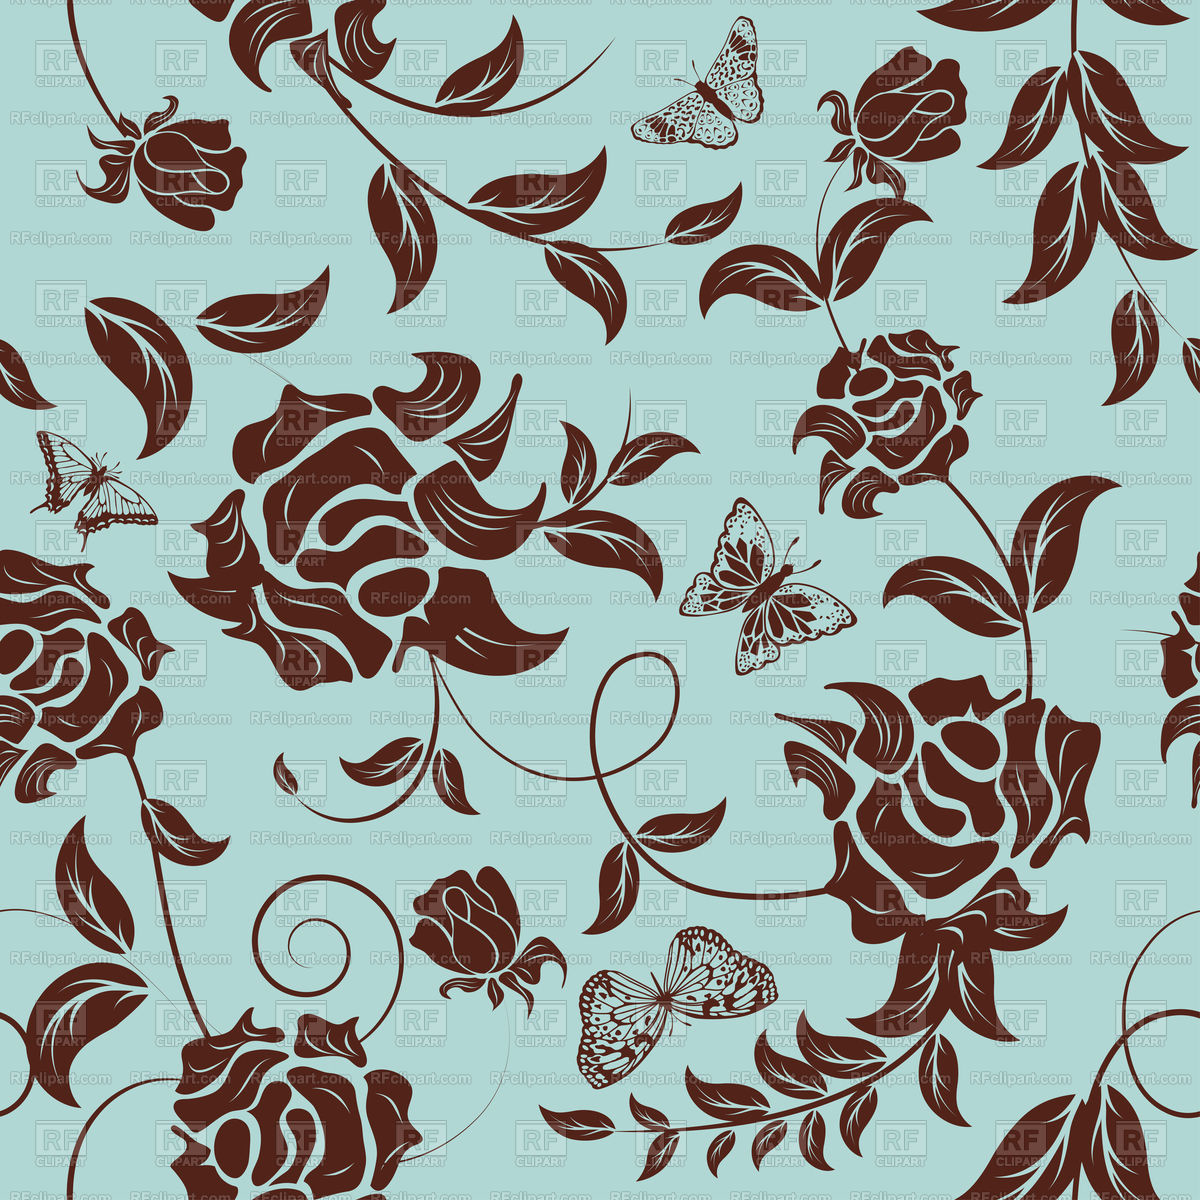 Seamless Brown And Blue Floral Wallpaper Vector Image - HD Wallpaper 